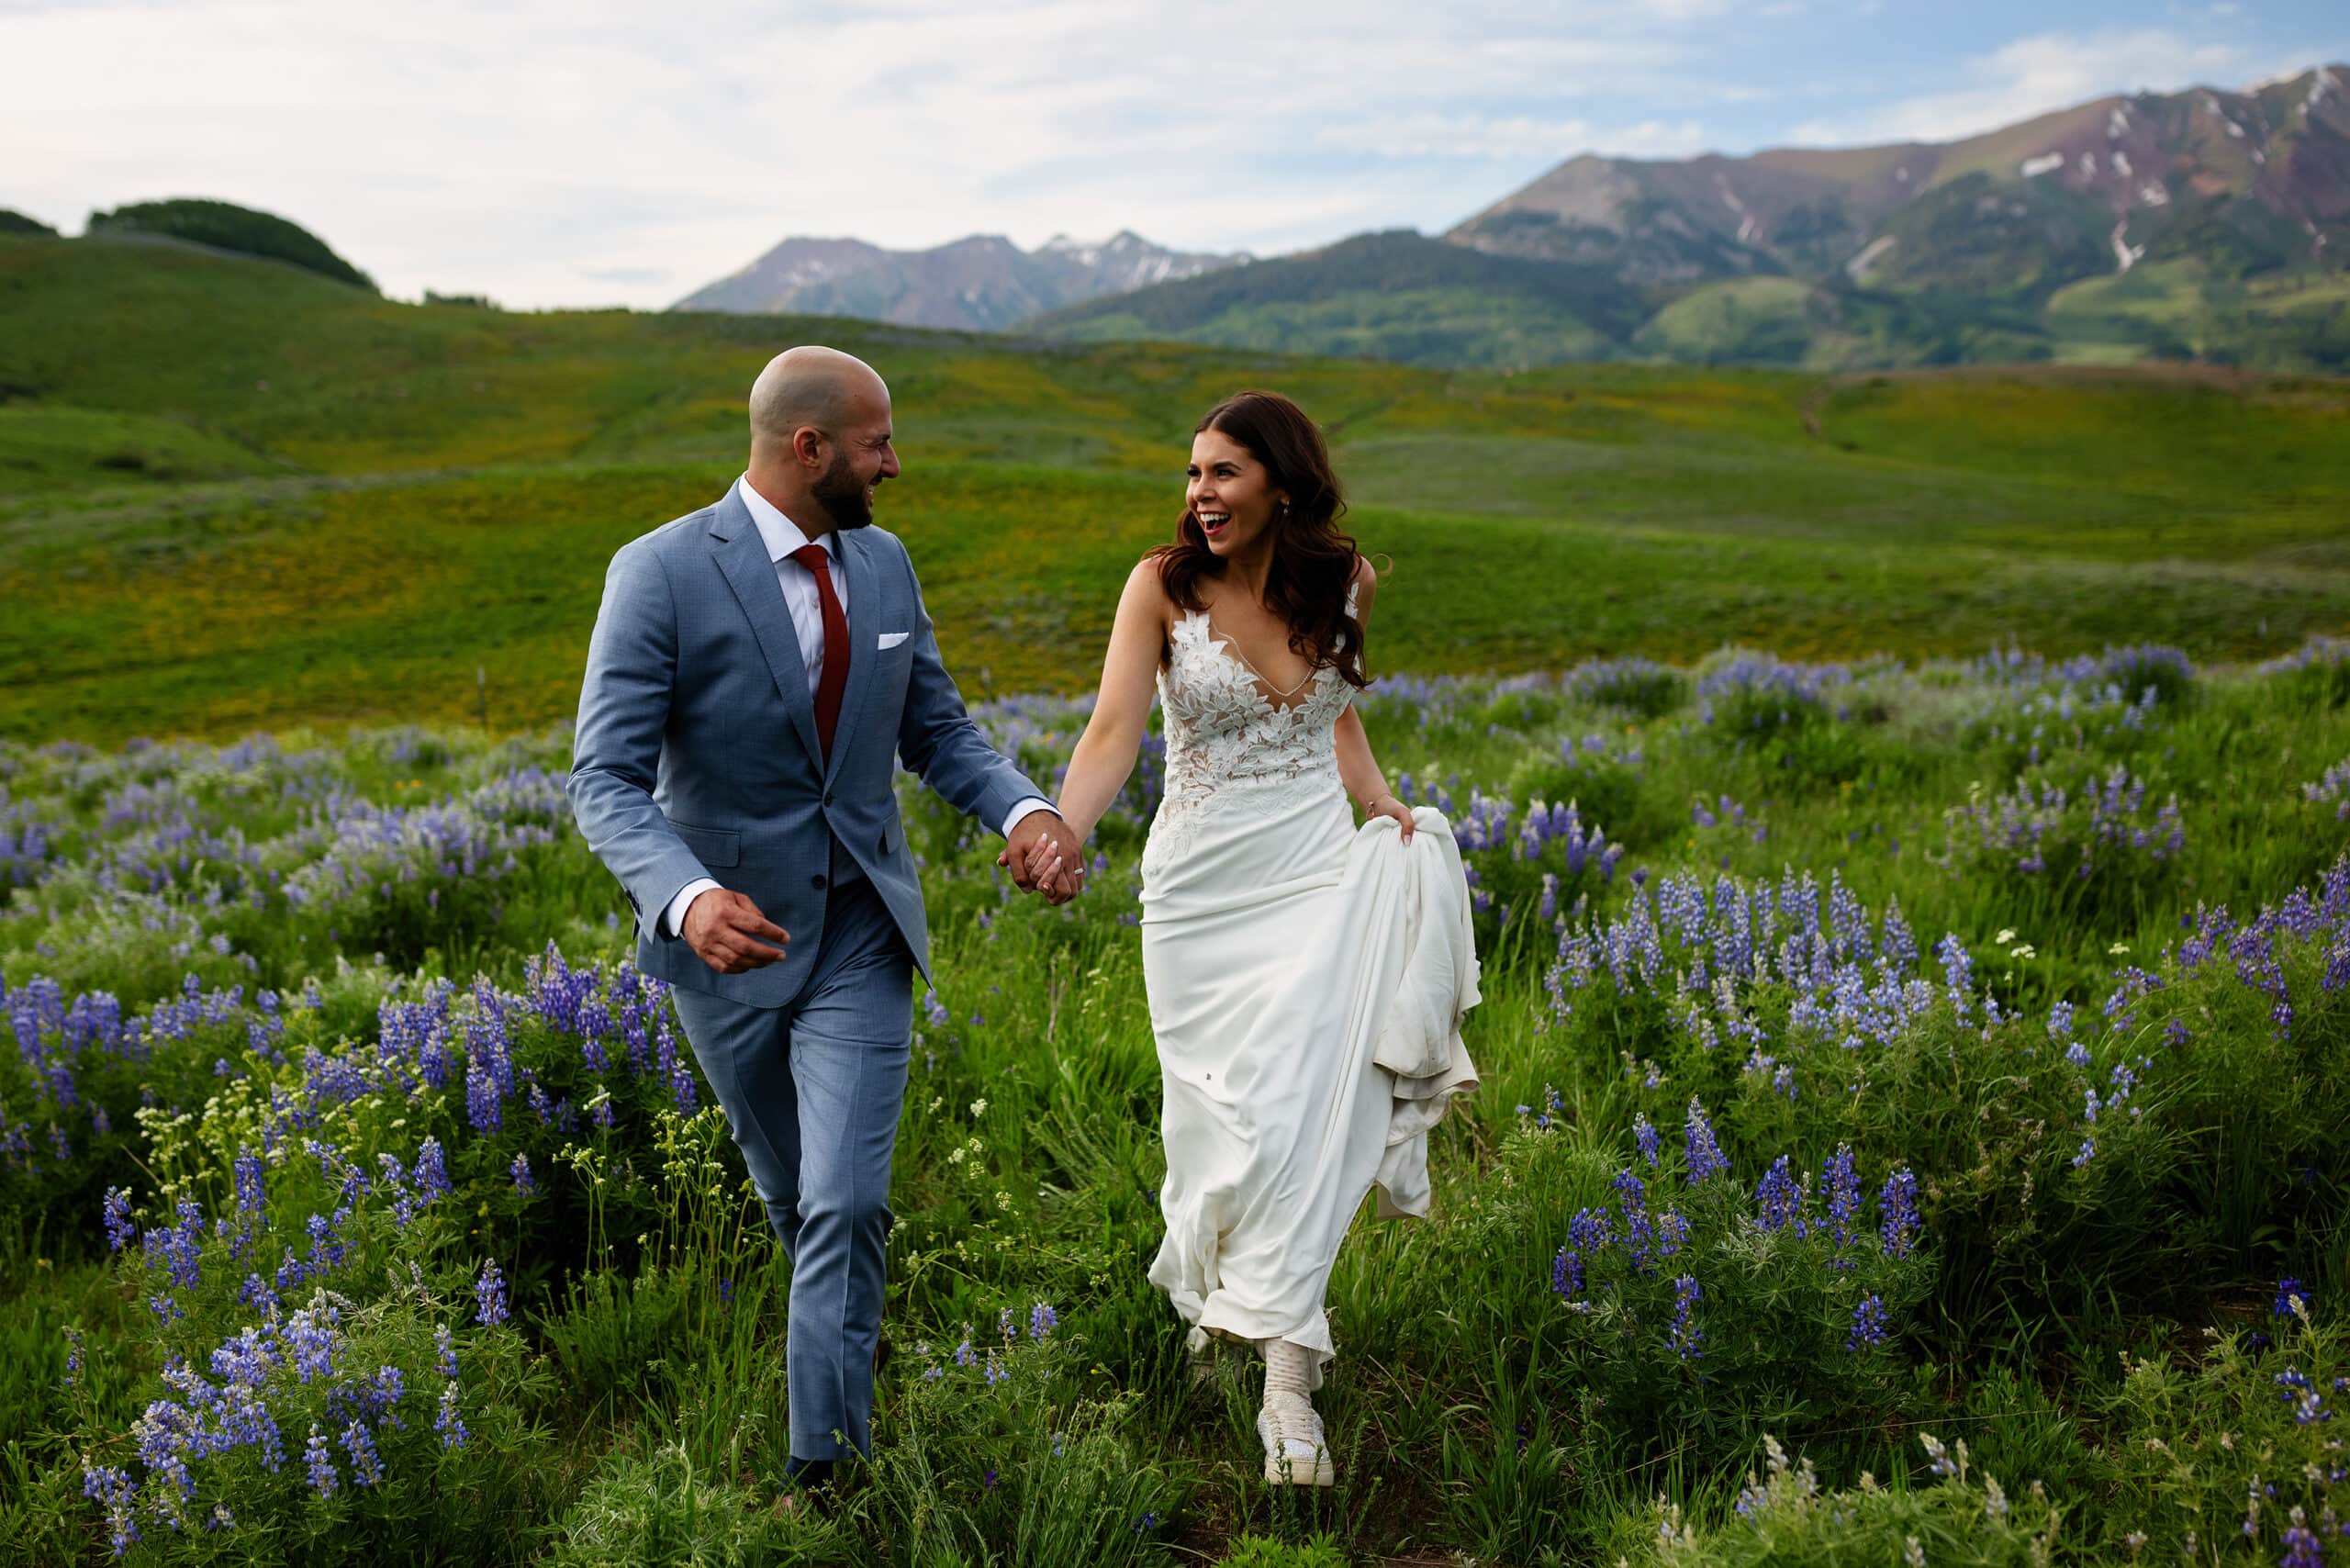 The groom and bride hold hands and run through a field of wildflowers in Crested Butte